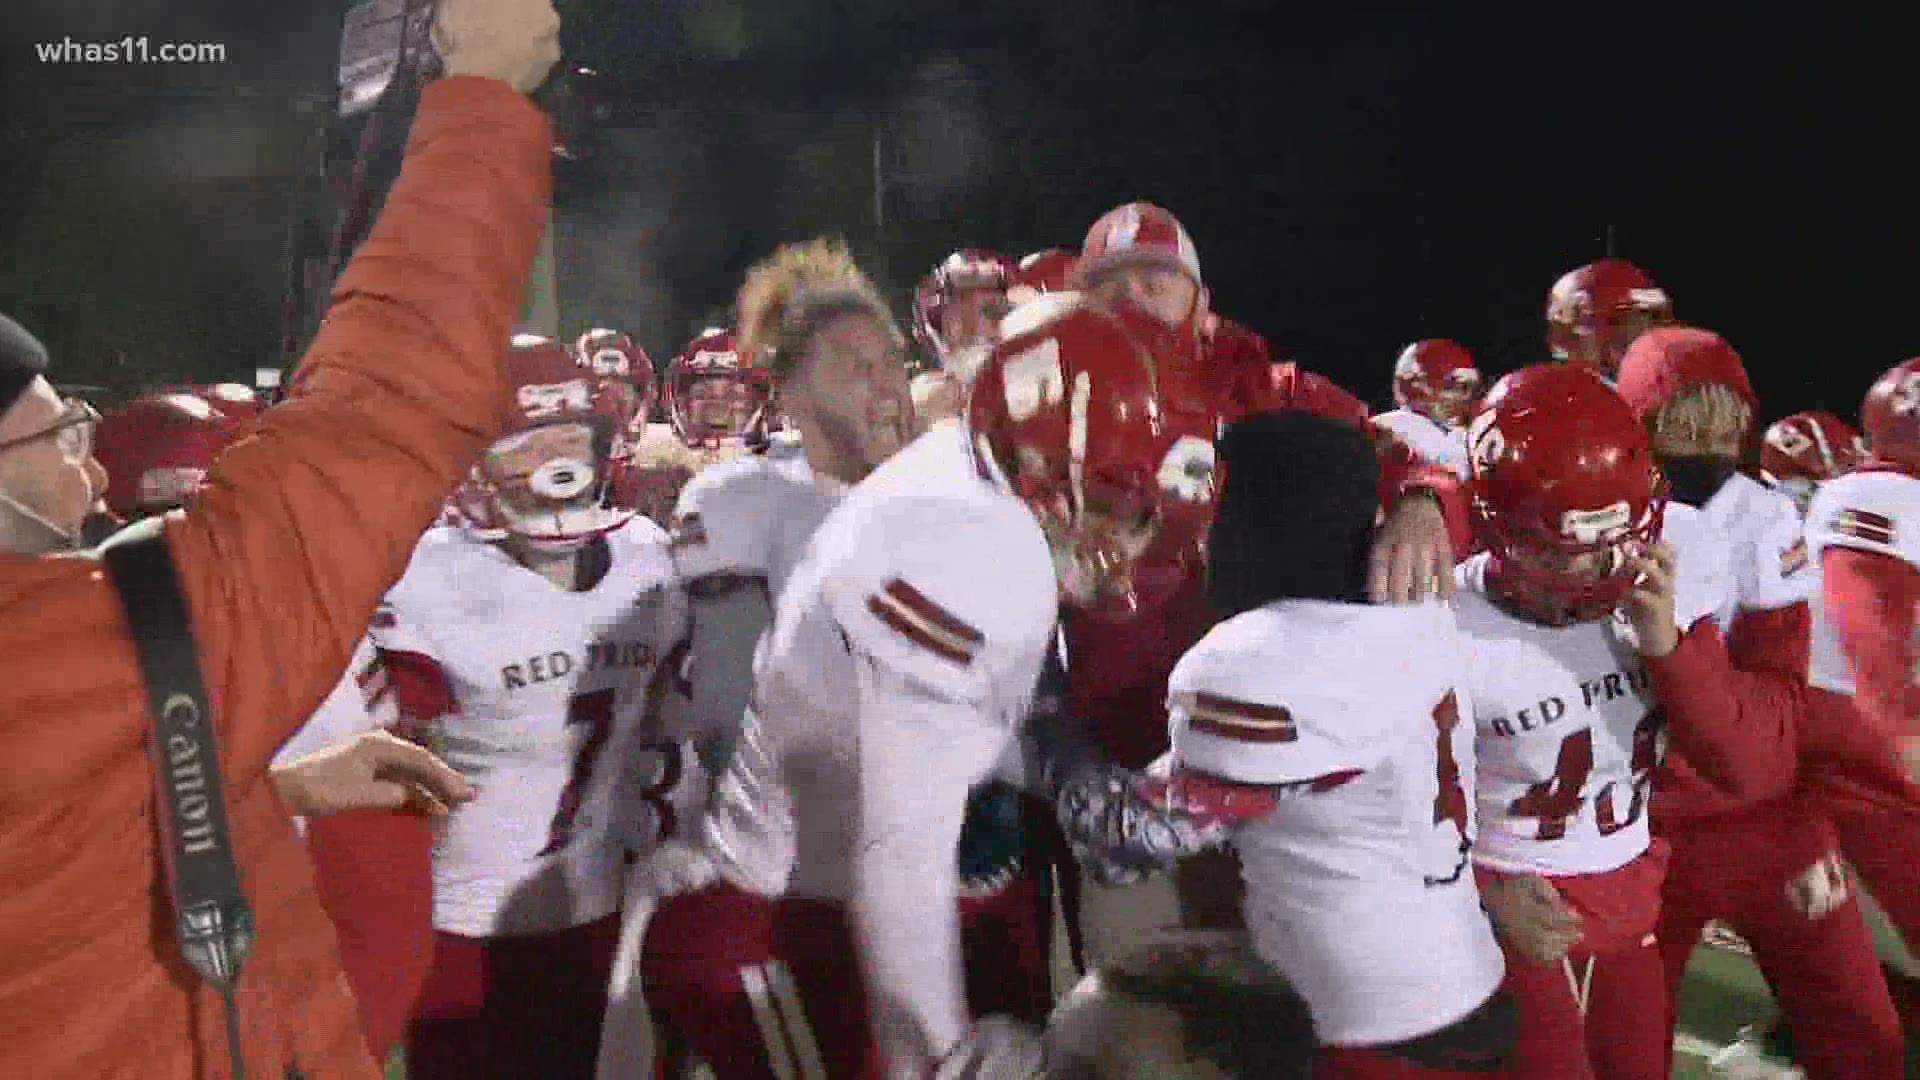 Jeffersonville pulled off the upset over Floyd Central, who had previously beaten them this season, winning 35-28.